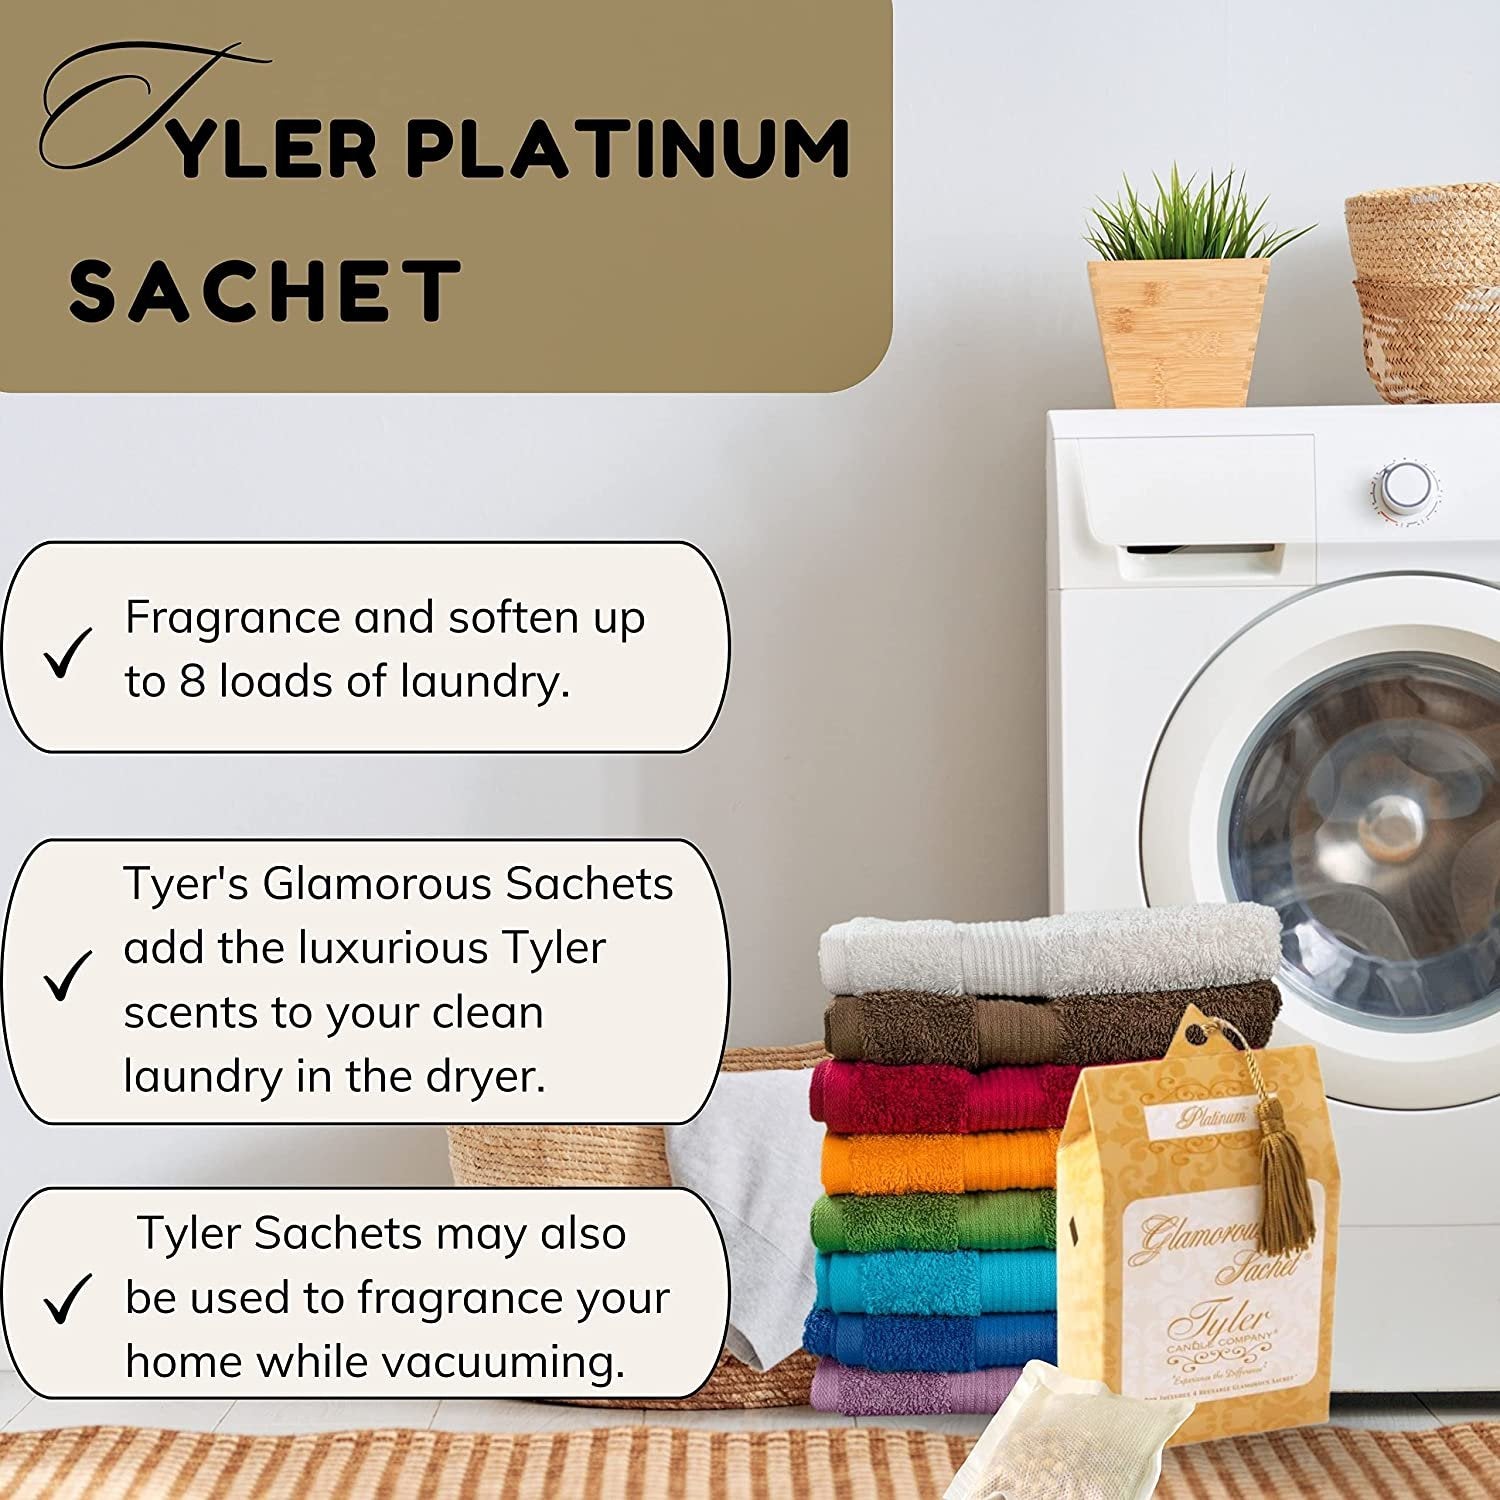 Tyler Candle Company Platinum Dryer Sheet Sachets - Glamorous Reusable Dryer Sheets - Sachets for Drawers and Closets - 2 Pack of 4 Sachets, Dryer, Home, or Personal Sachet, with Bonus Key Chain